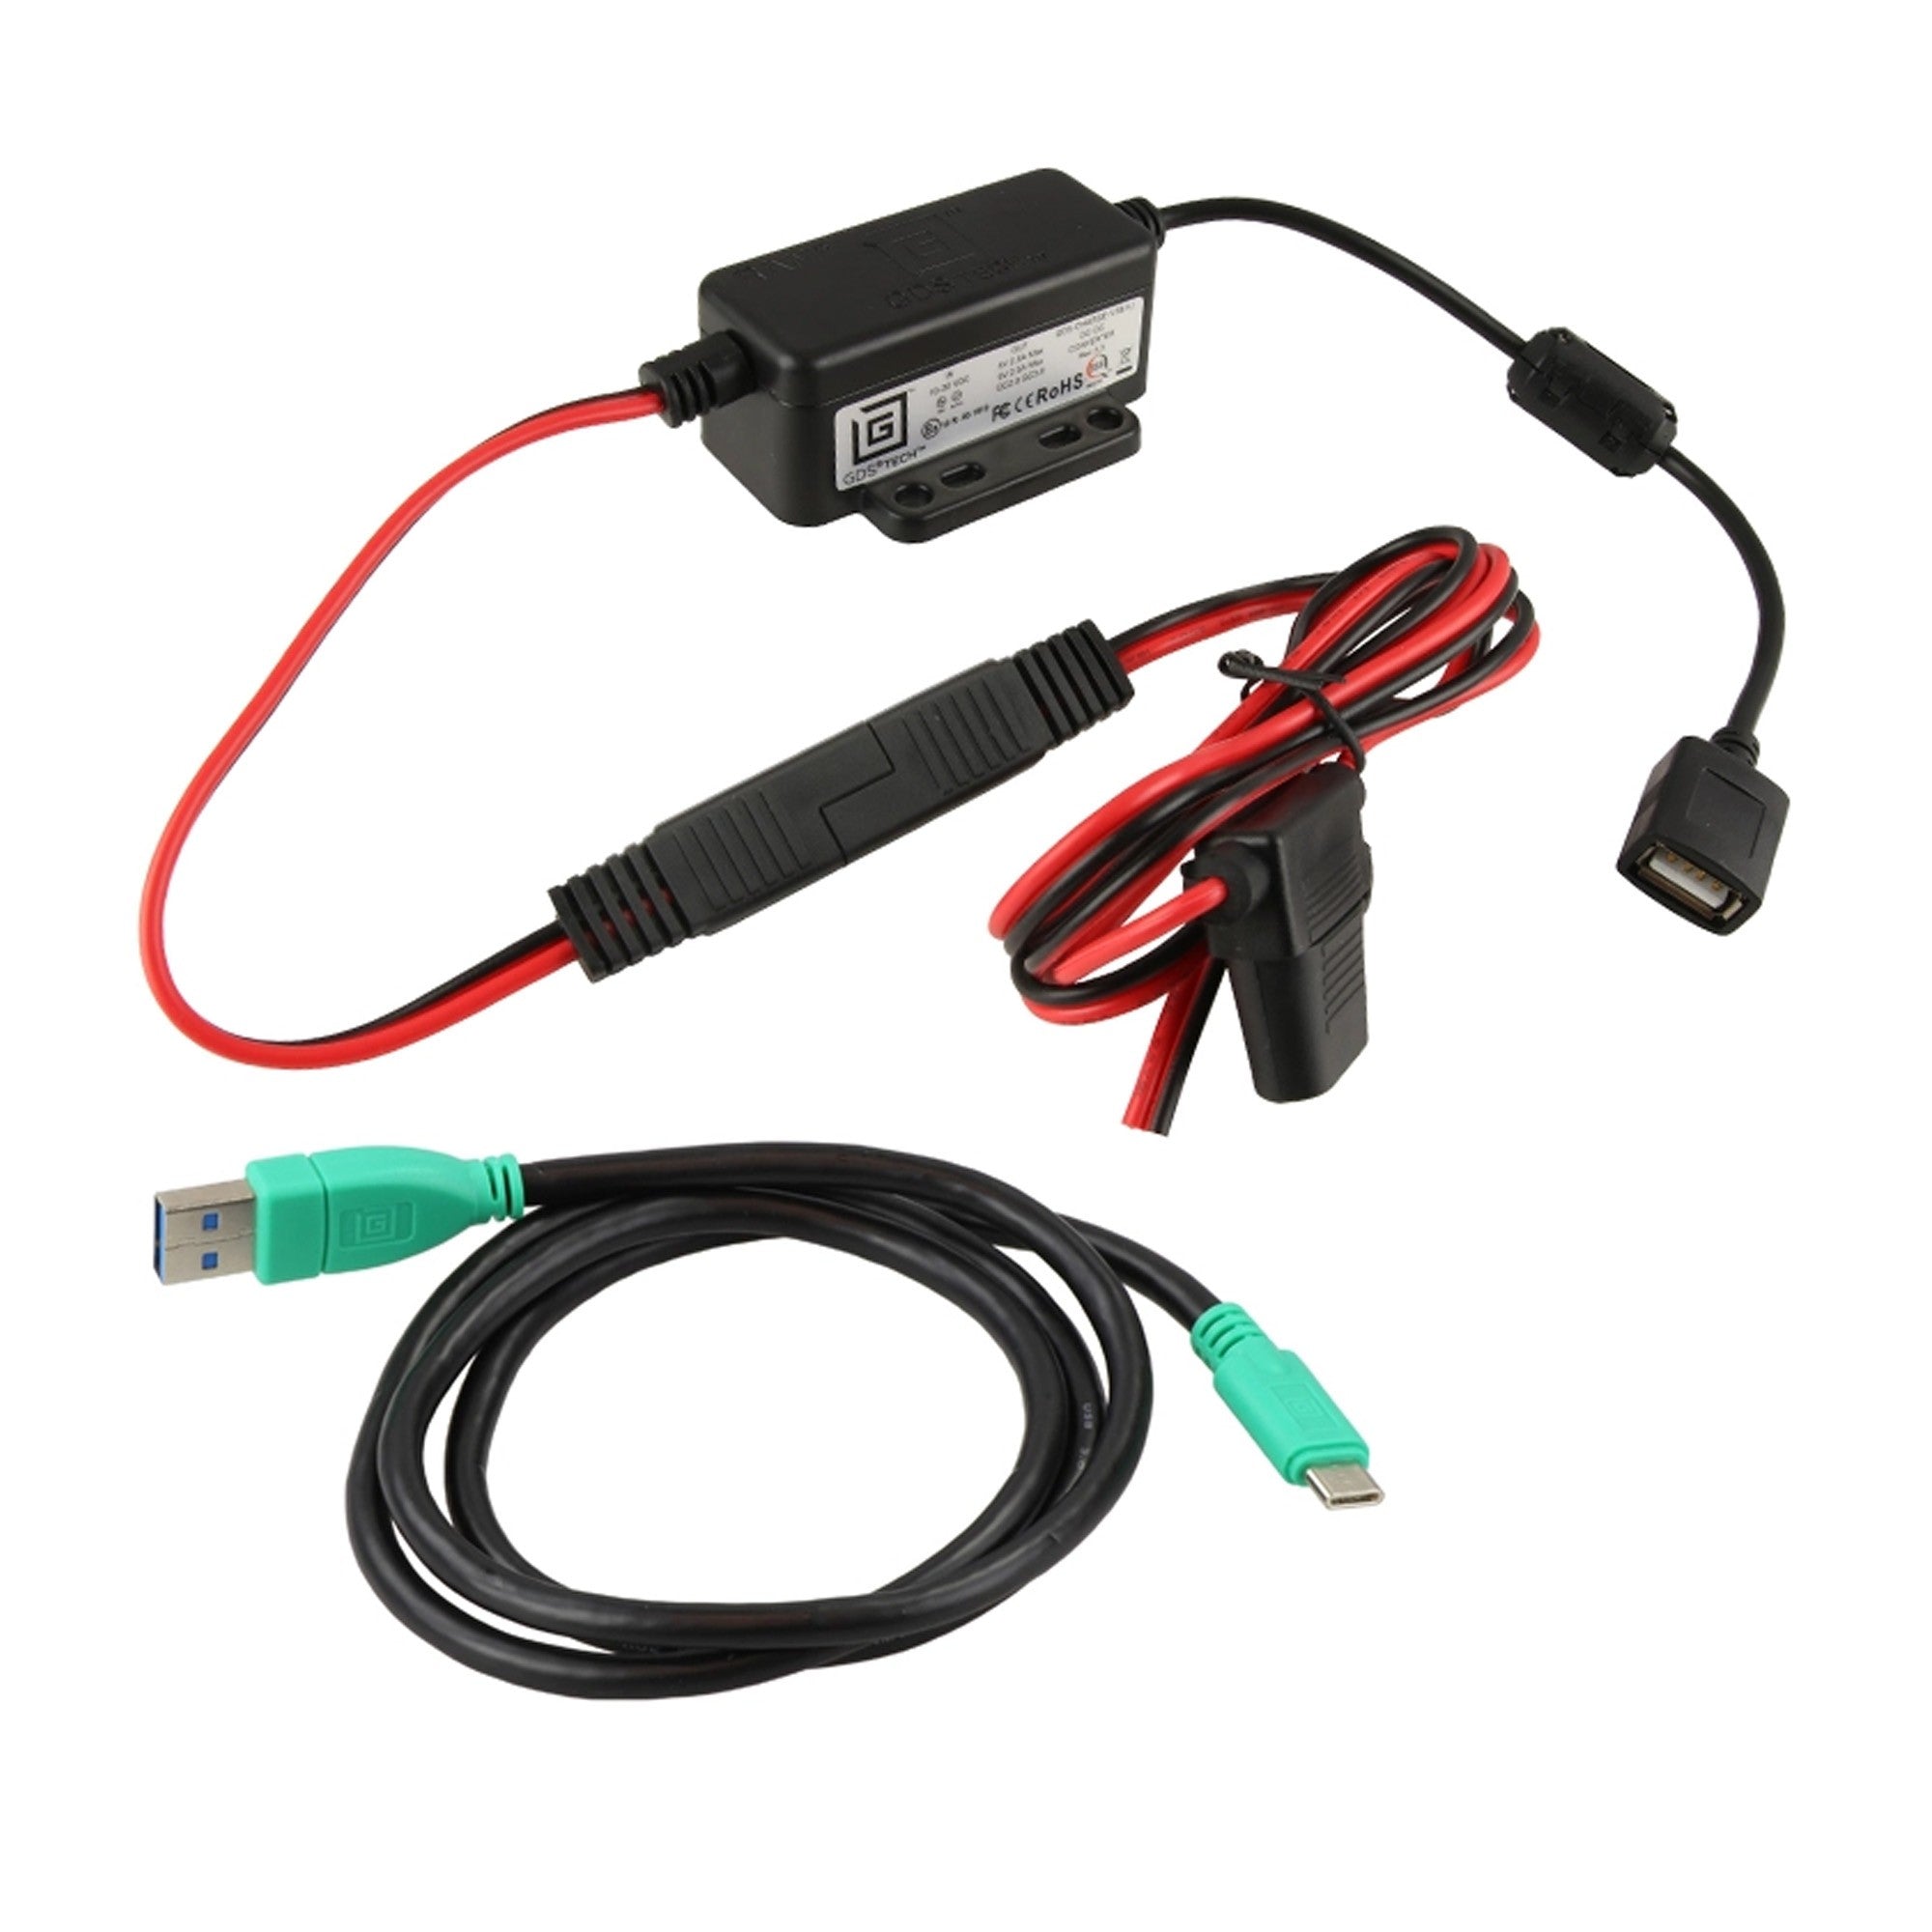 RAM GDS Modular 10-30V Hardwire Charger with Type-C Cable